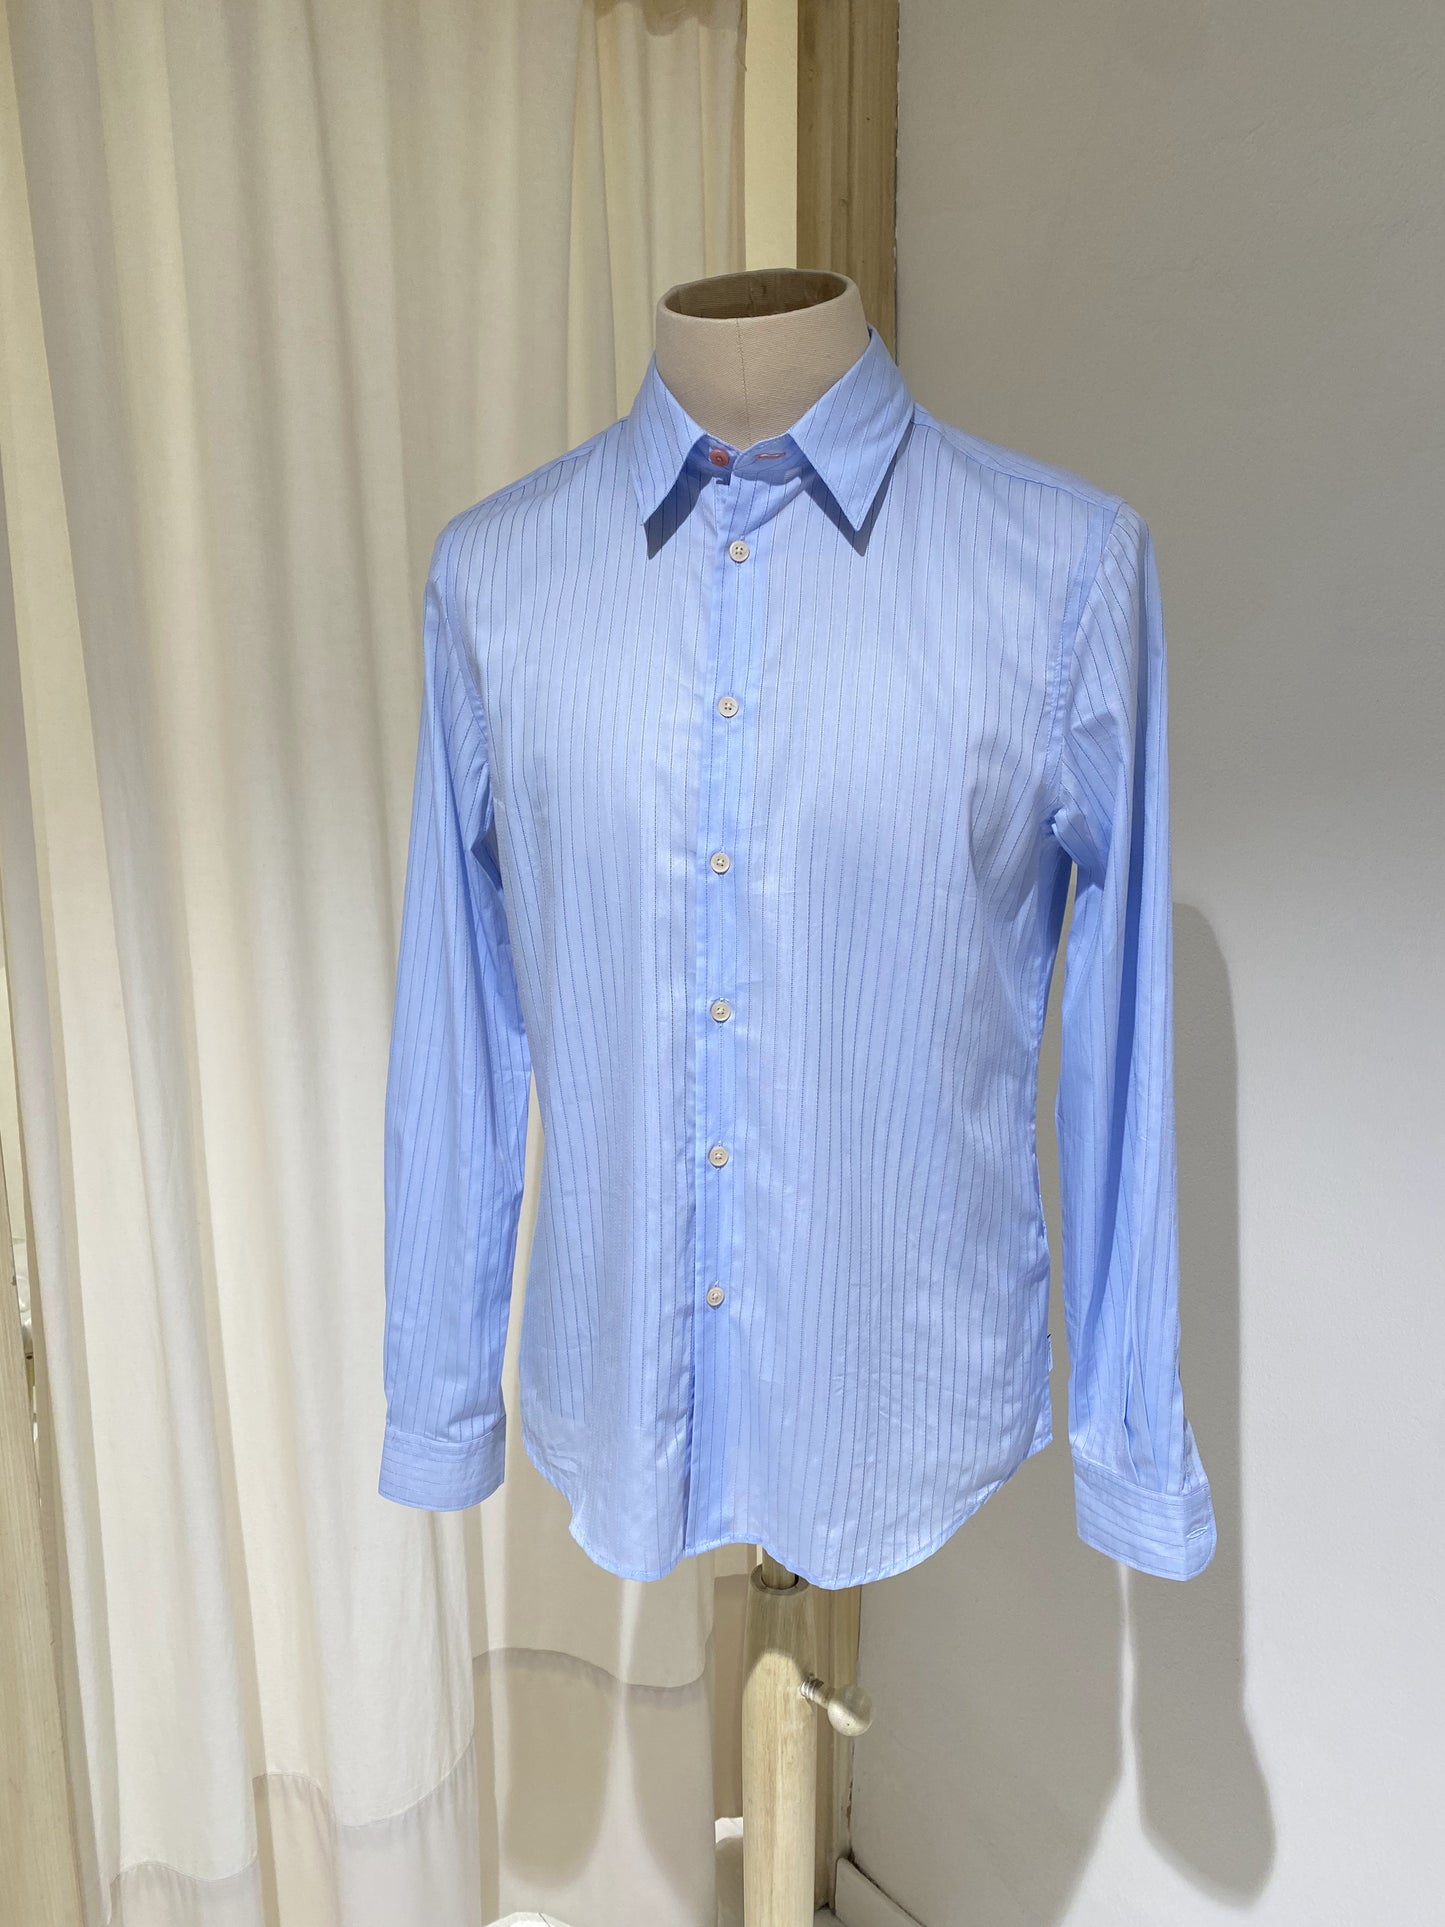 M TAILORED FIT LONG SLEEVE SHIRT - PS PAUL SMITH - SKY BLUE